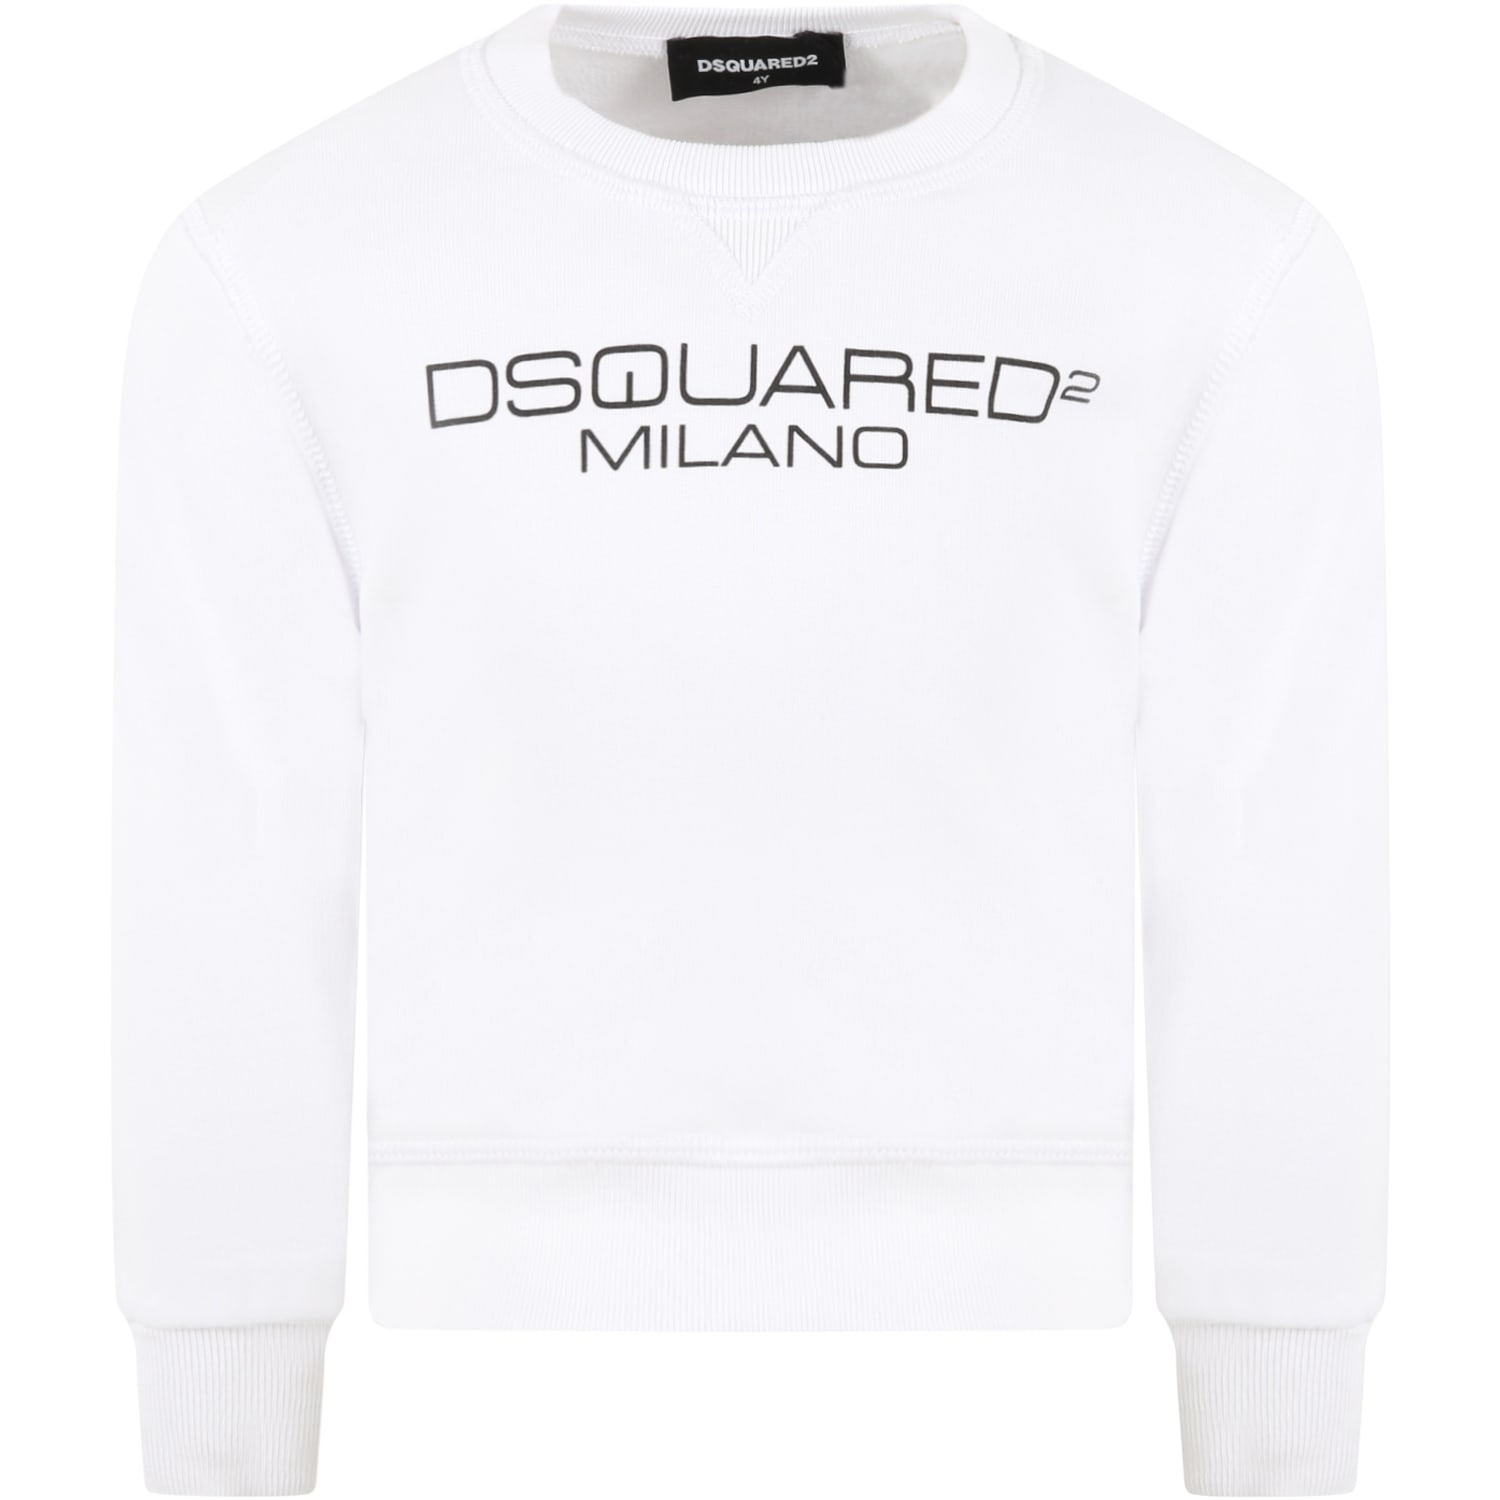 Dsquared2 White Sweatshirt For Kids With Writing